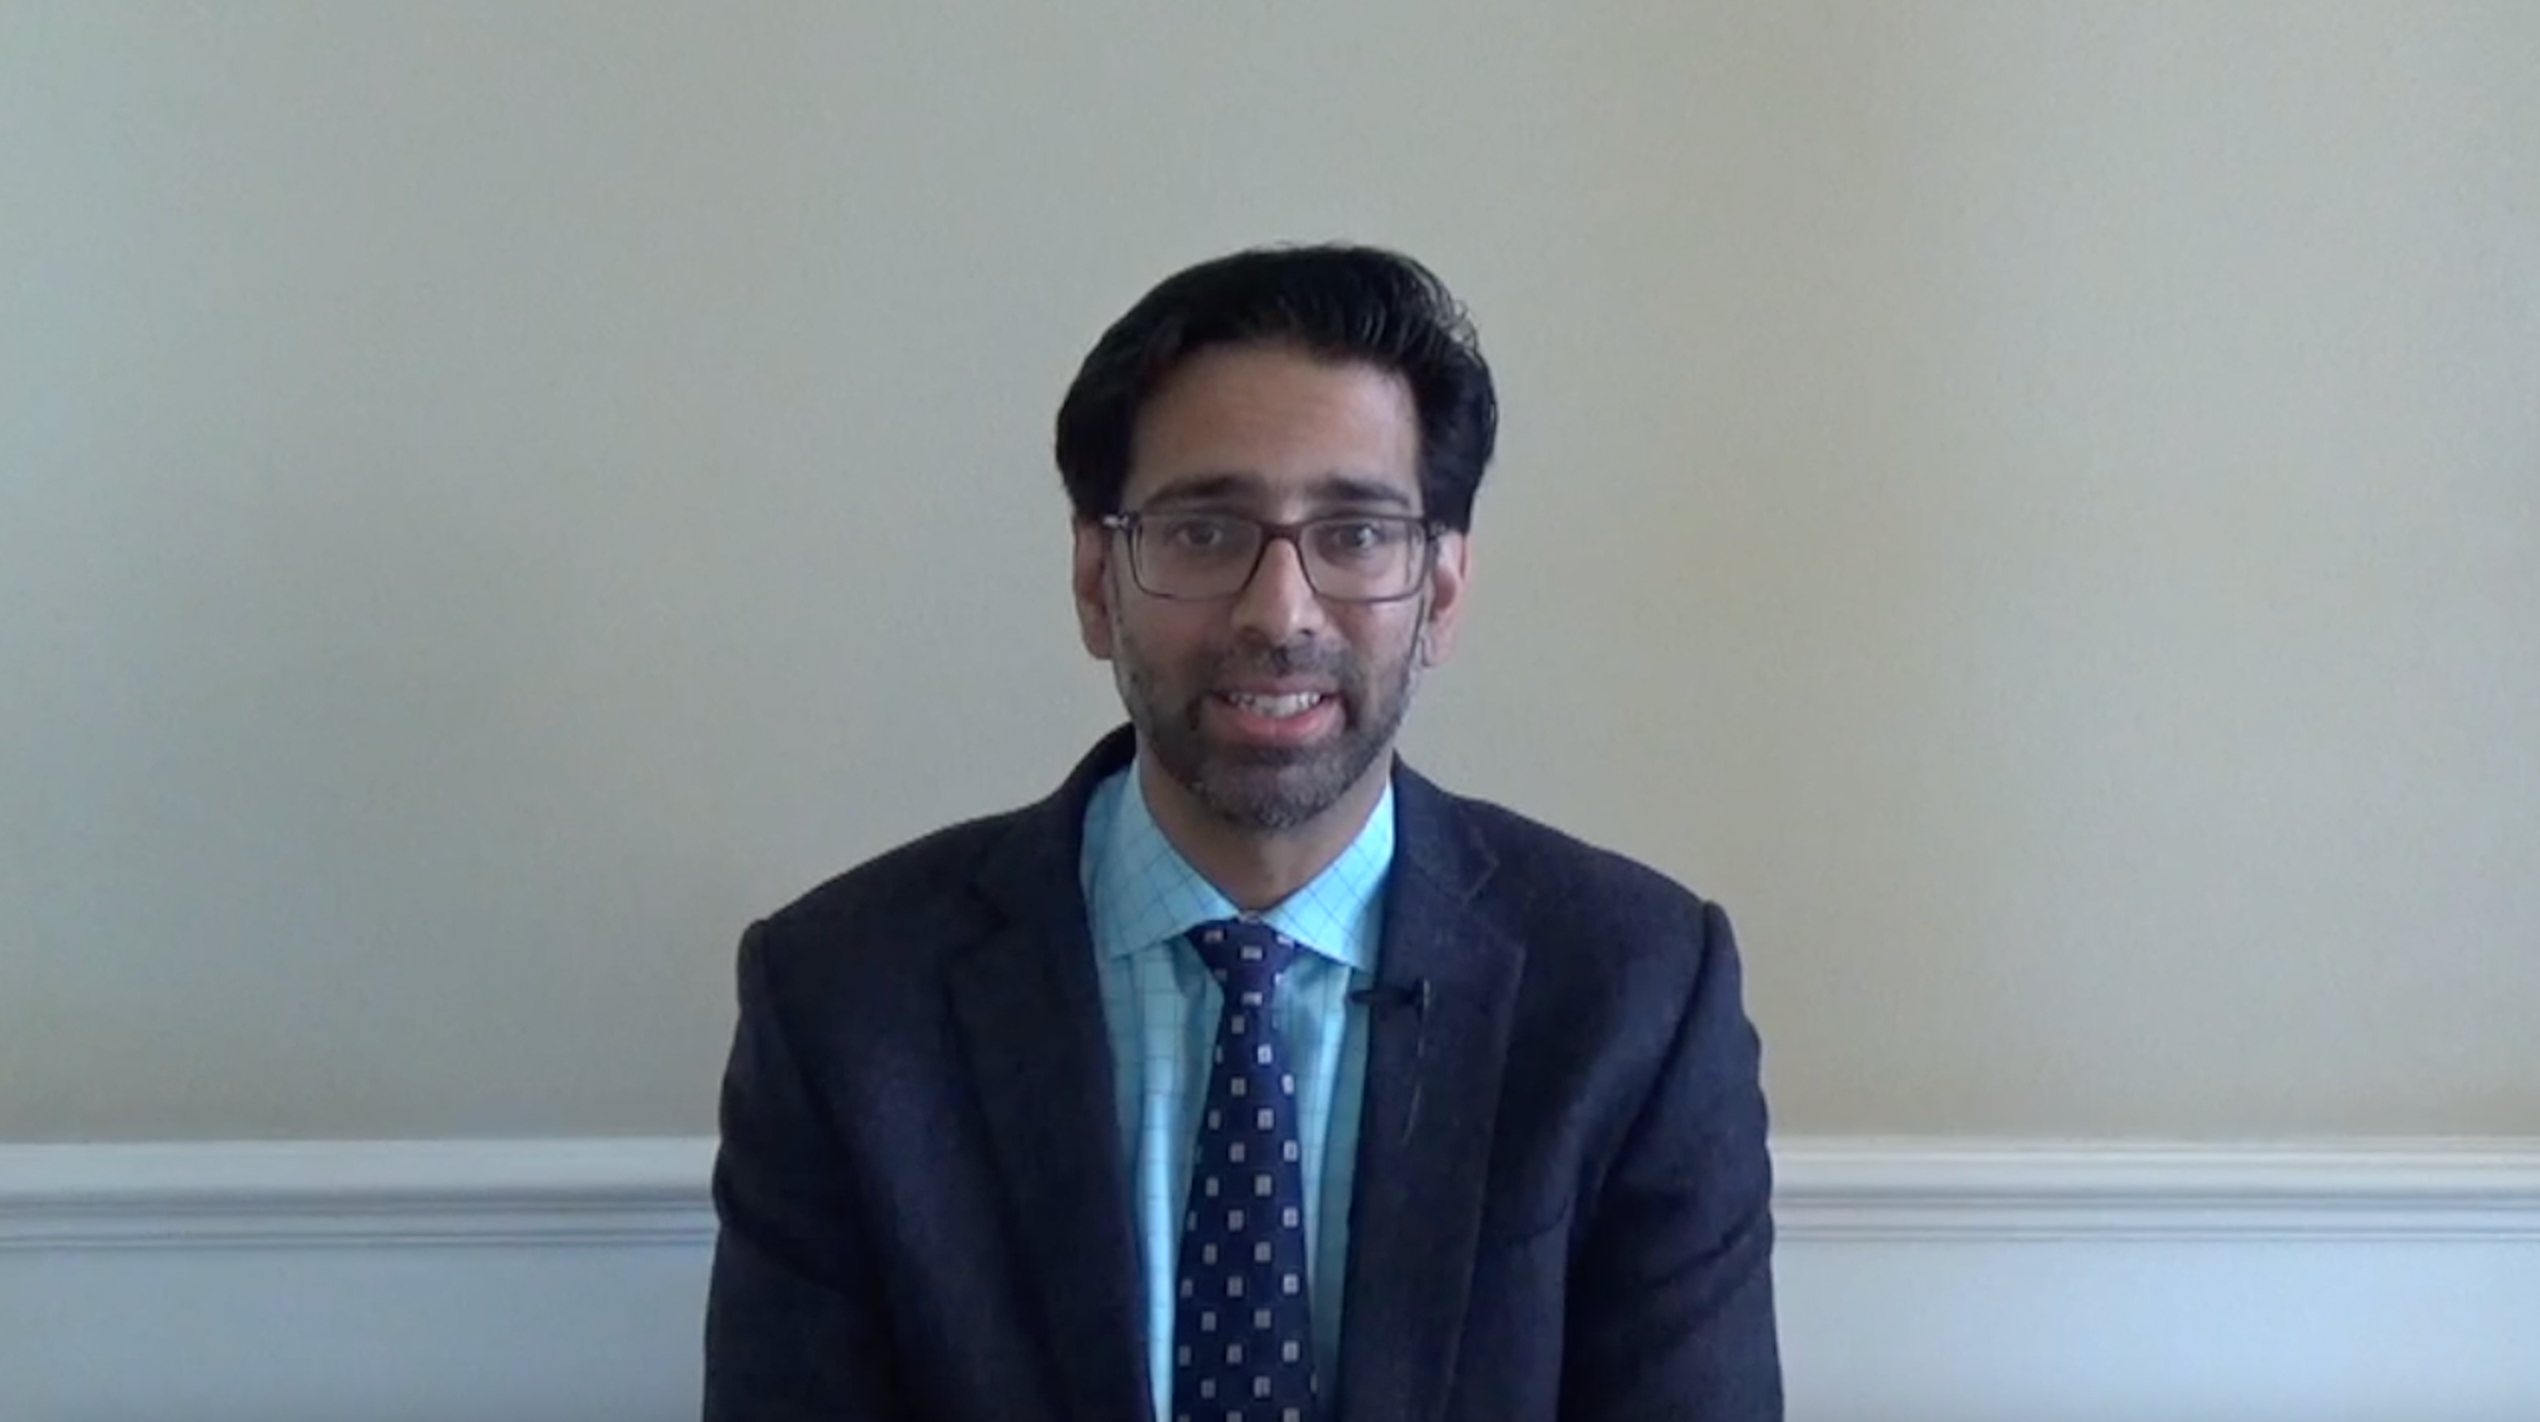 Dr. Siddiqui discusses recent and projected developments in bladder cancer